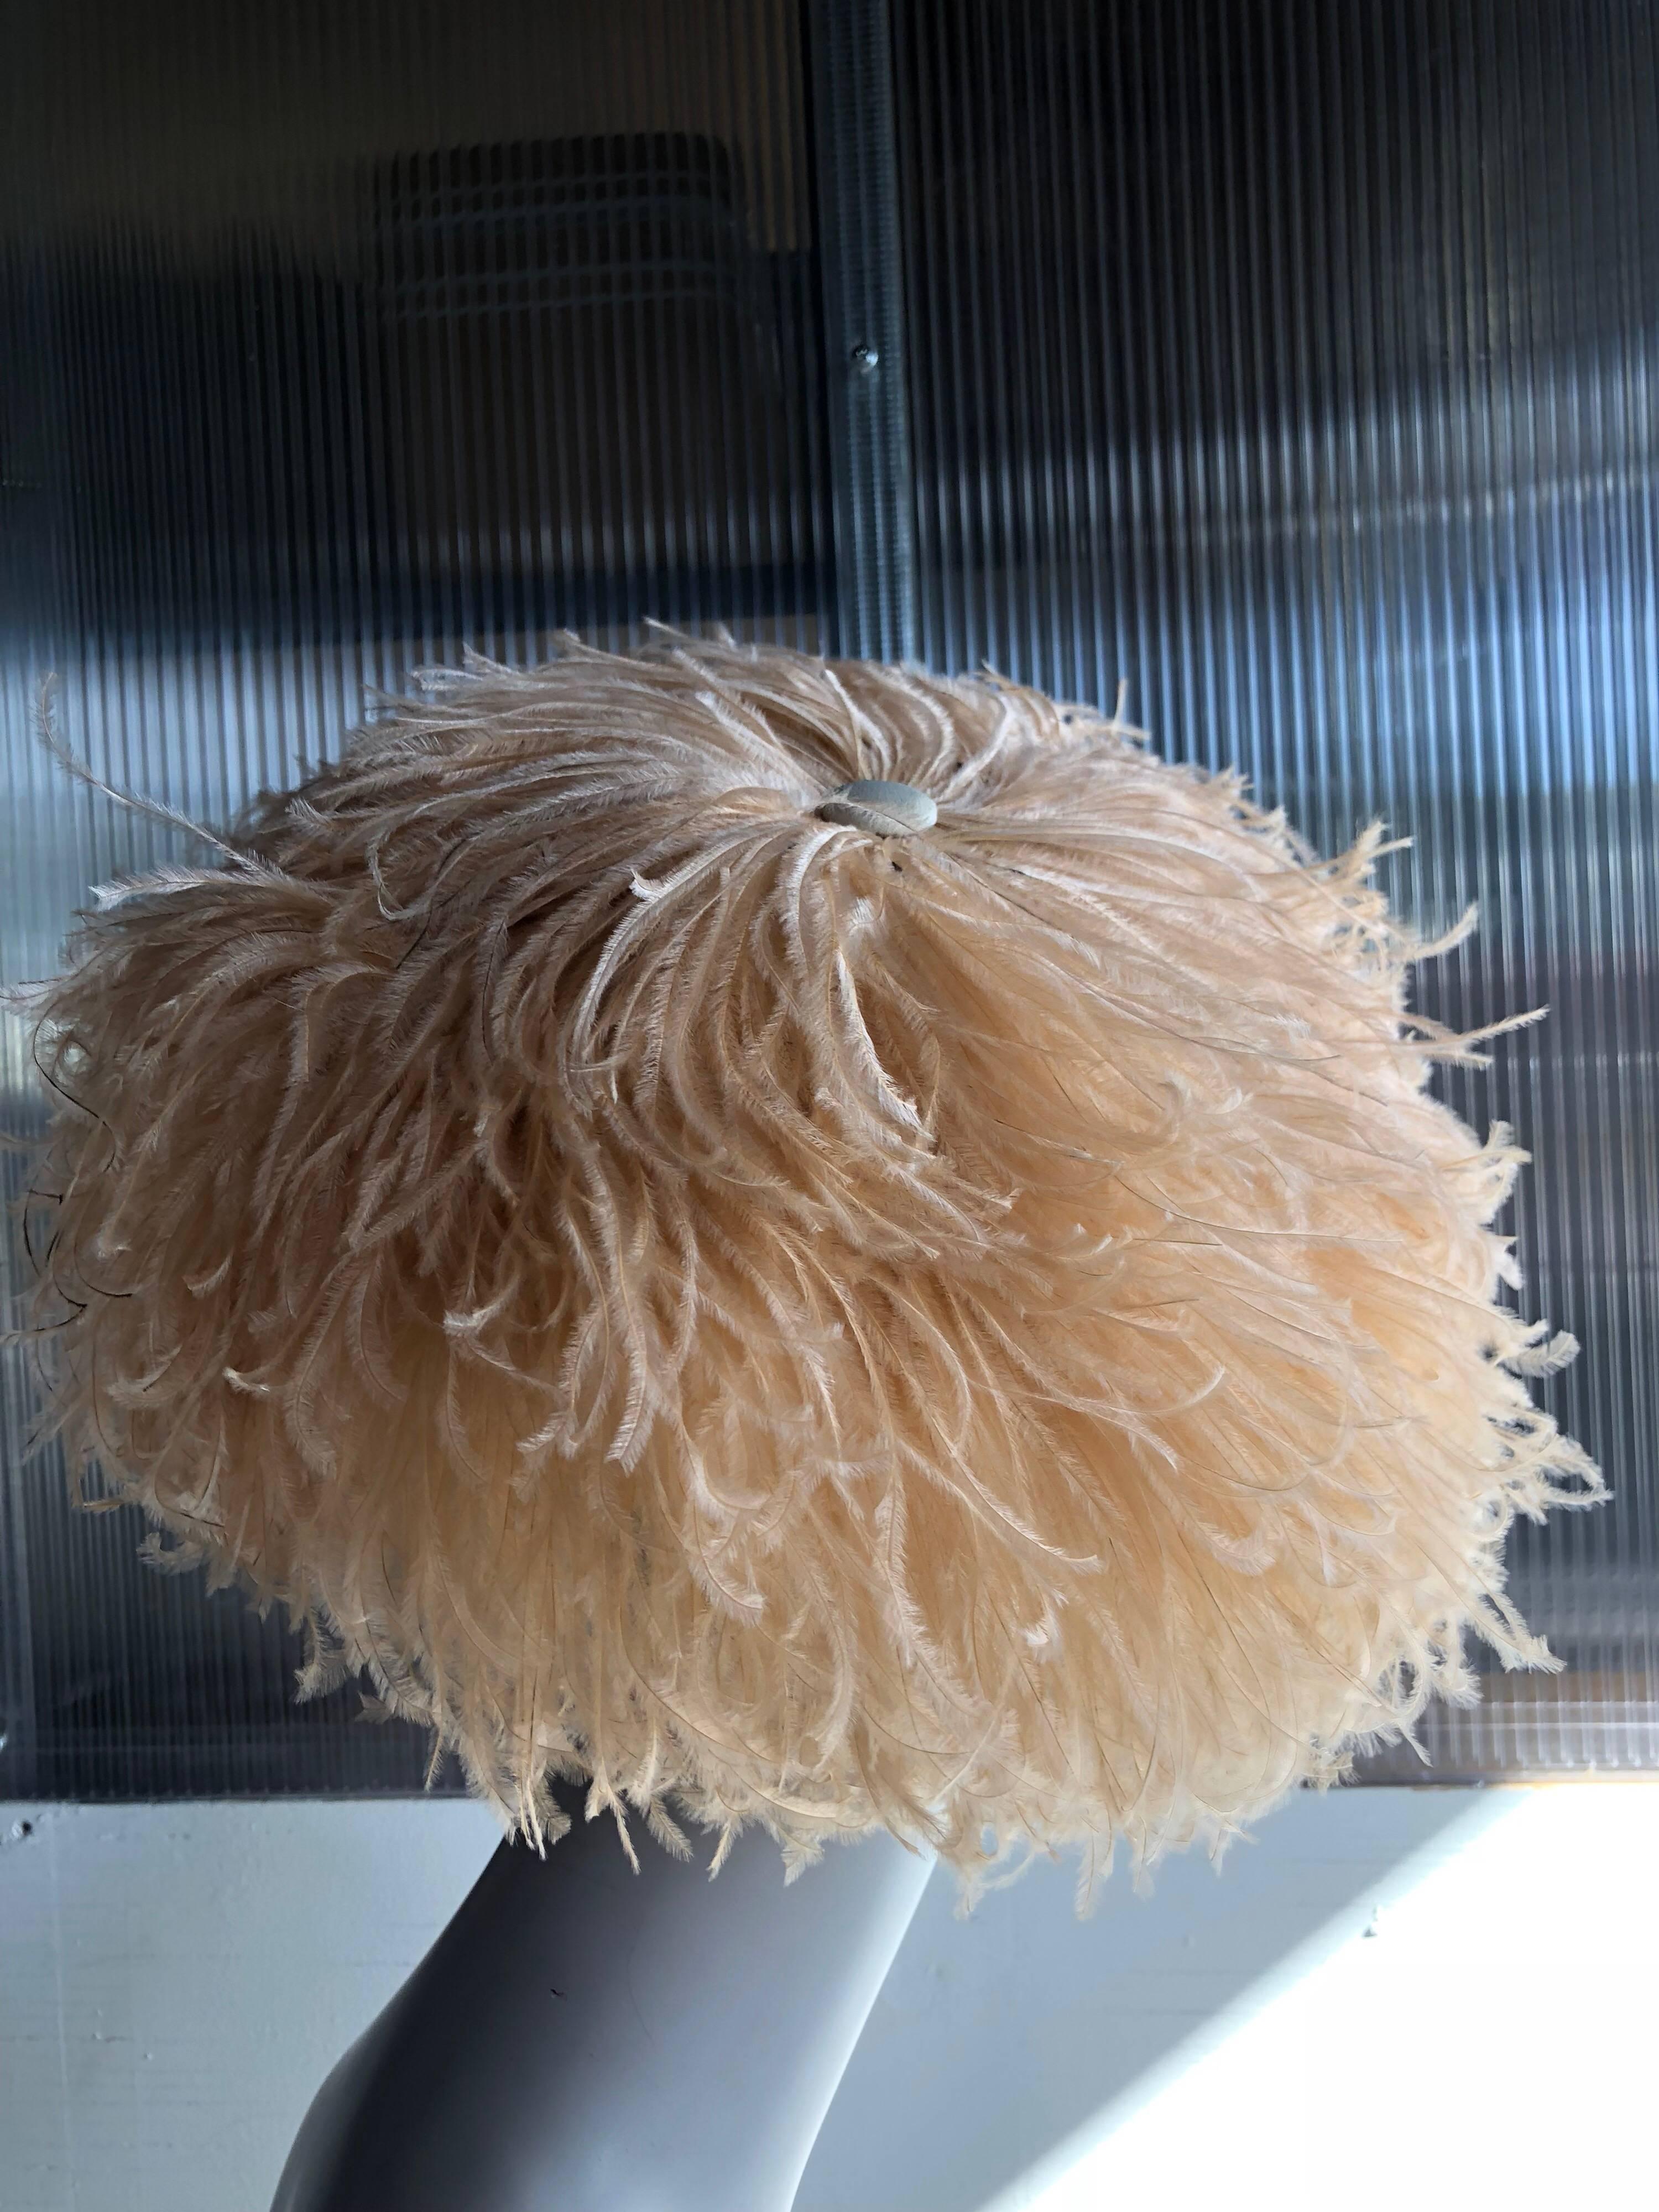 A beautiful 1950s Lora peach-toned curled ostrich feather cocktail hat:  The underlying structure of the hat is a saucer shape with a one-size-fits-all structured crown.  The luxurious peach ostrich feathers are arranged in a radial design from the